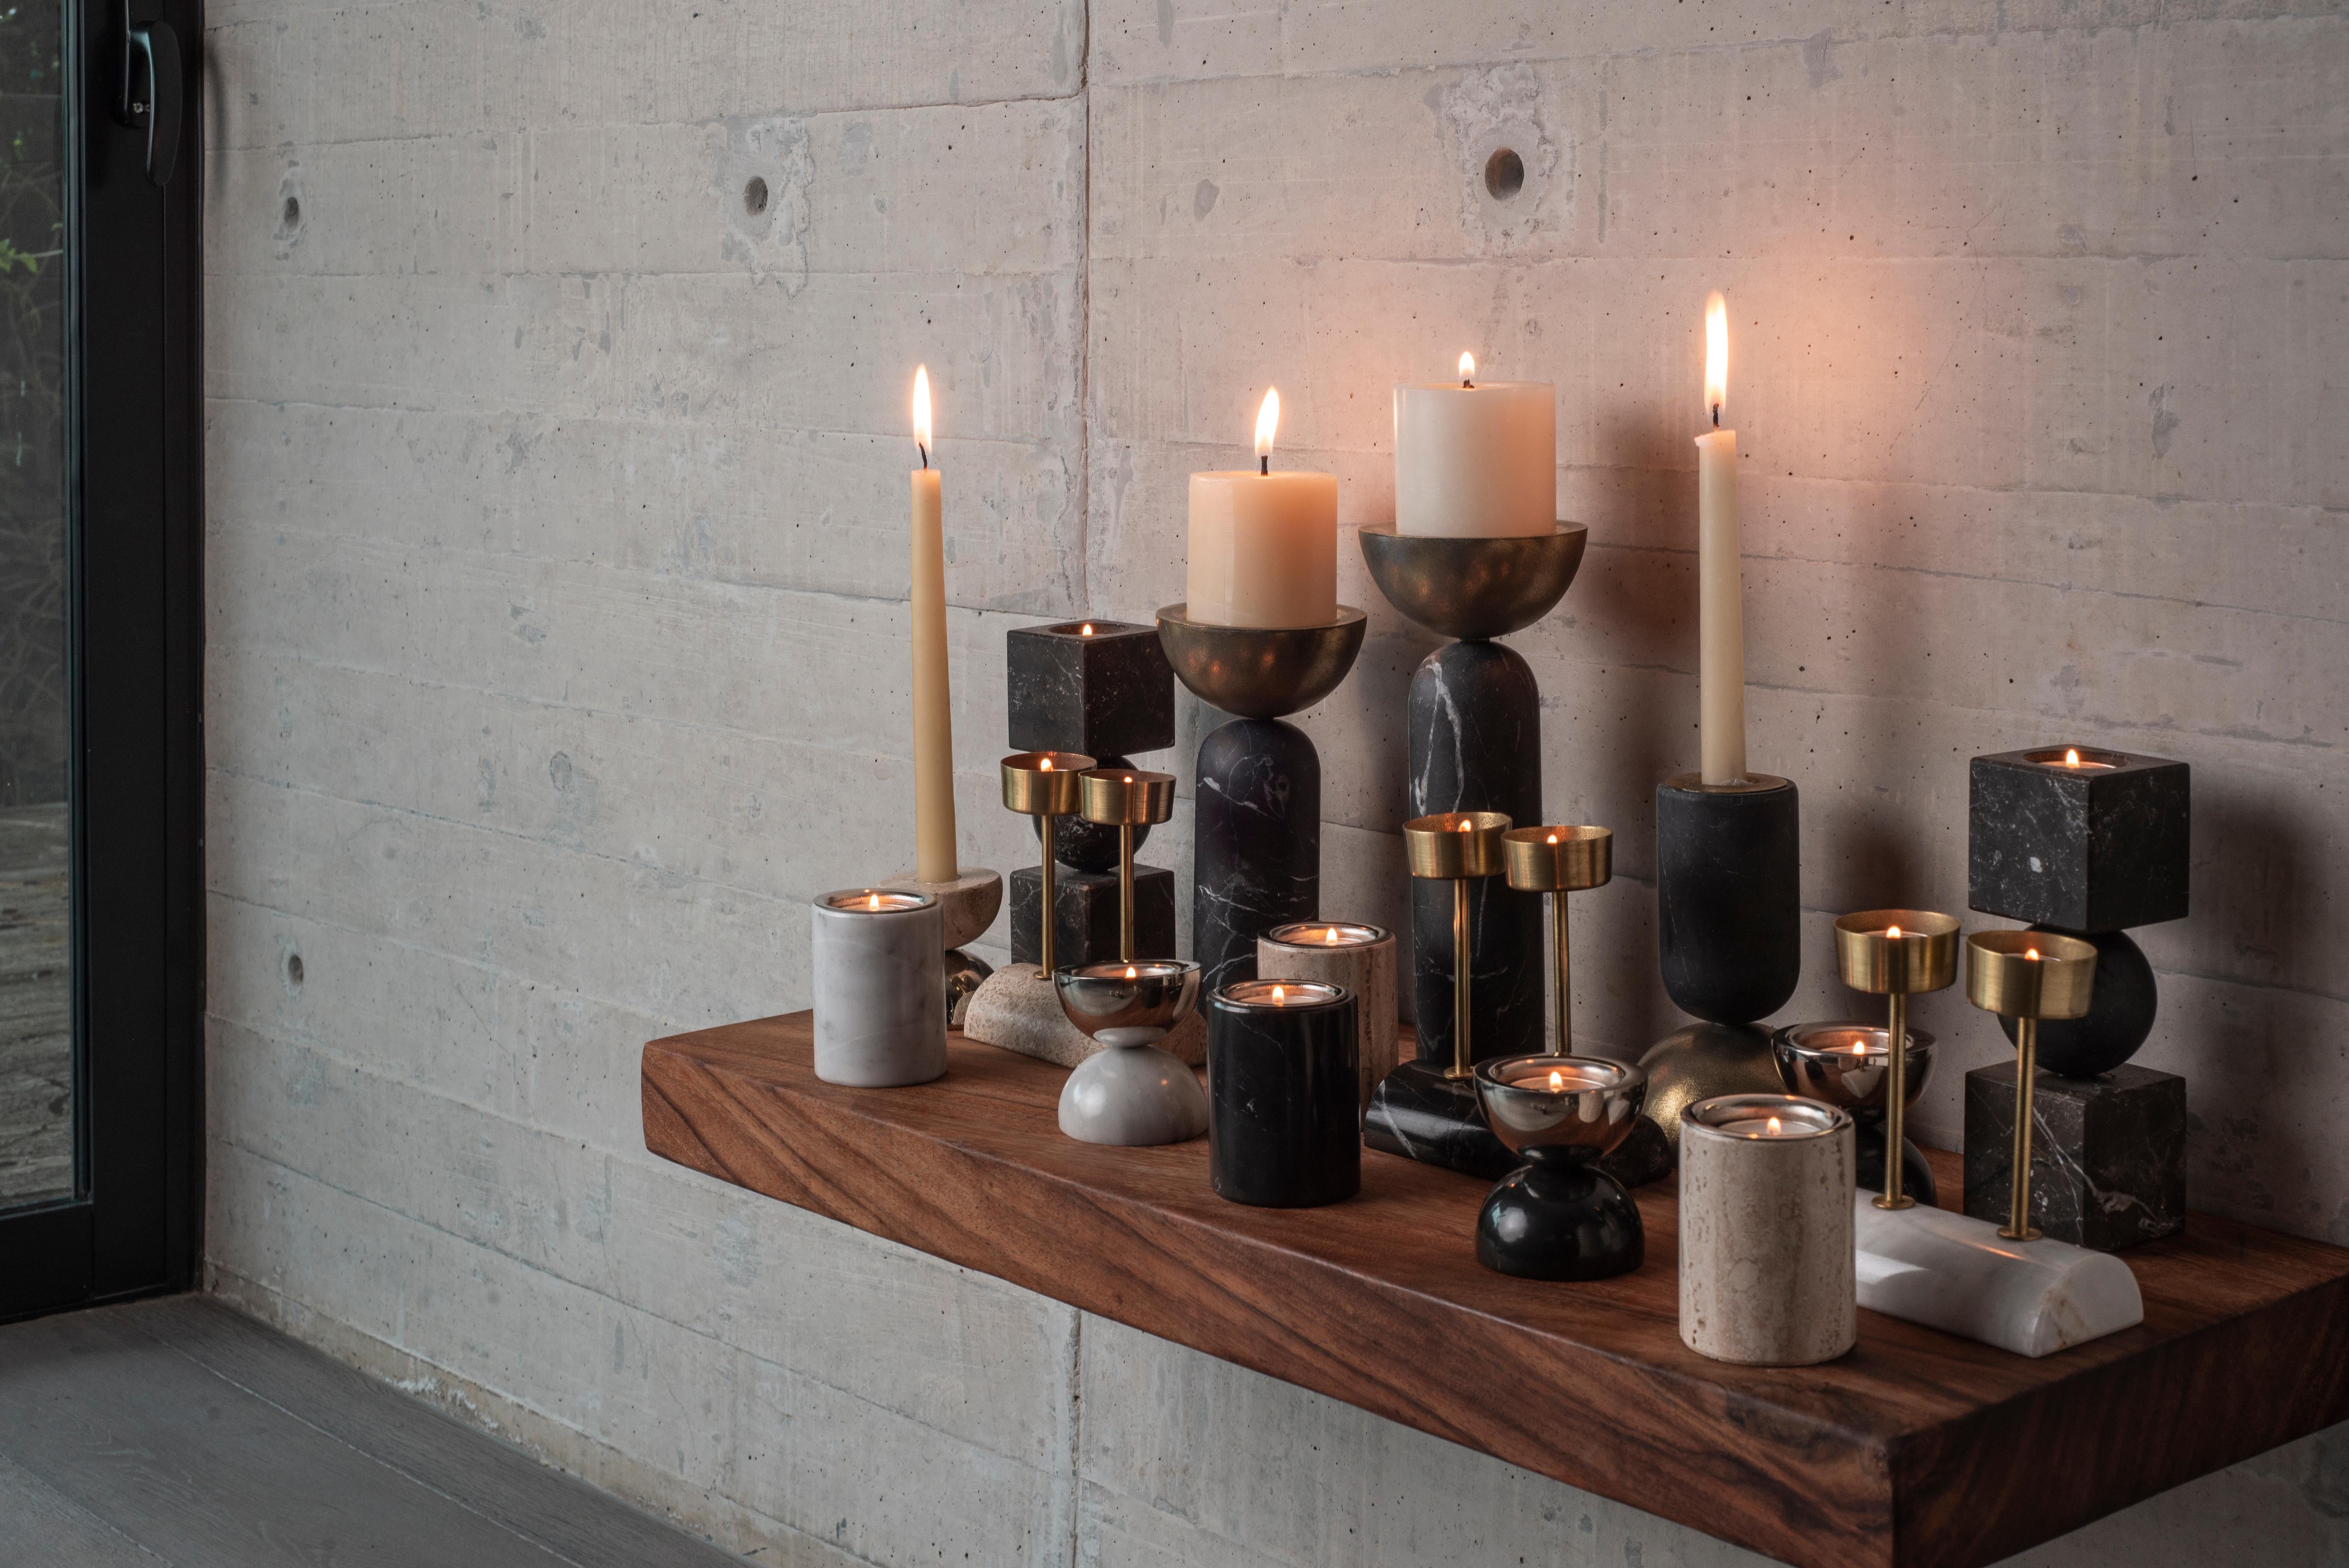 Mexican Balance Black Marble & Nickeled-Brass Candle Holders